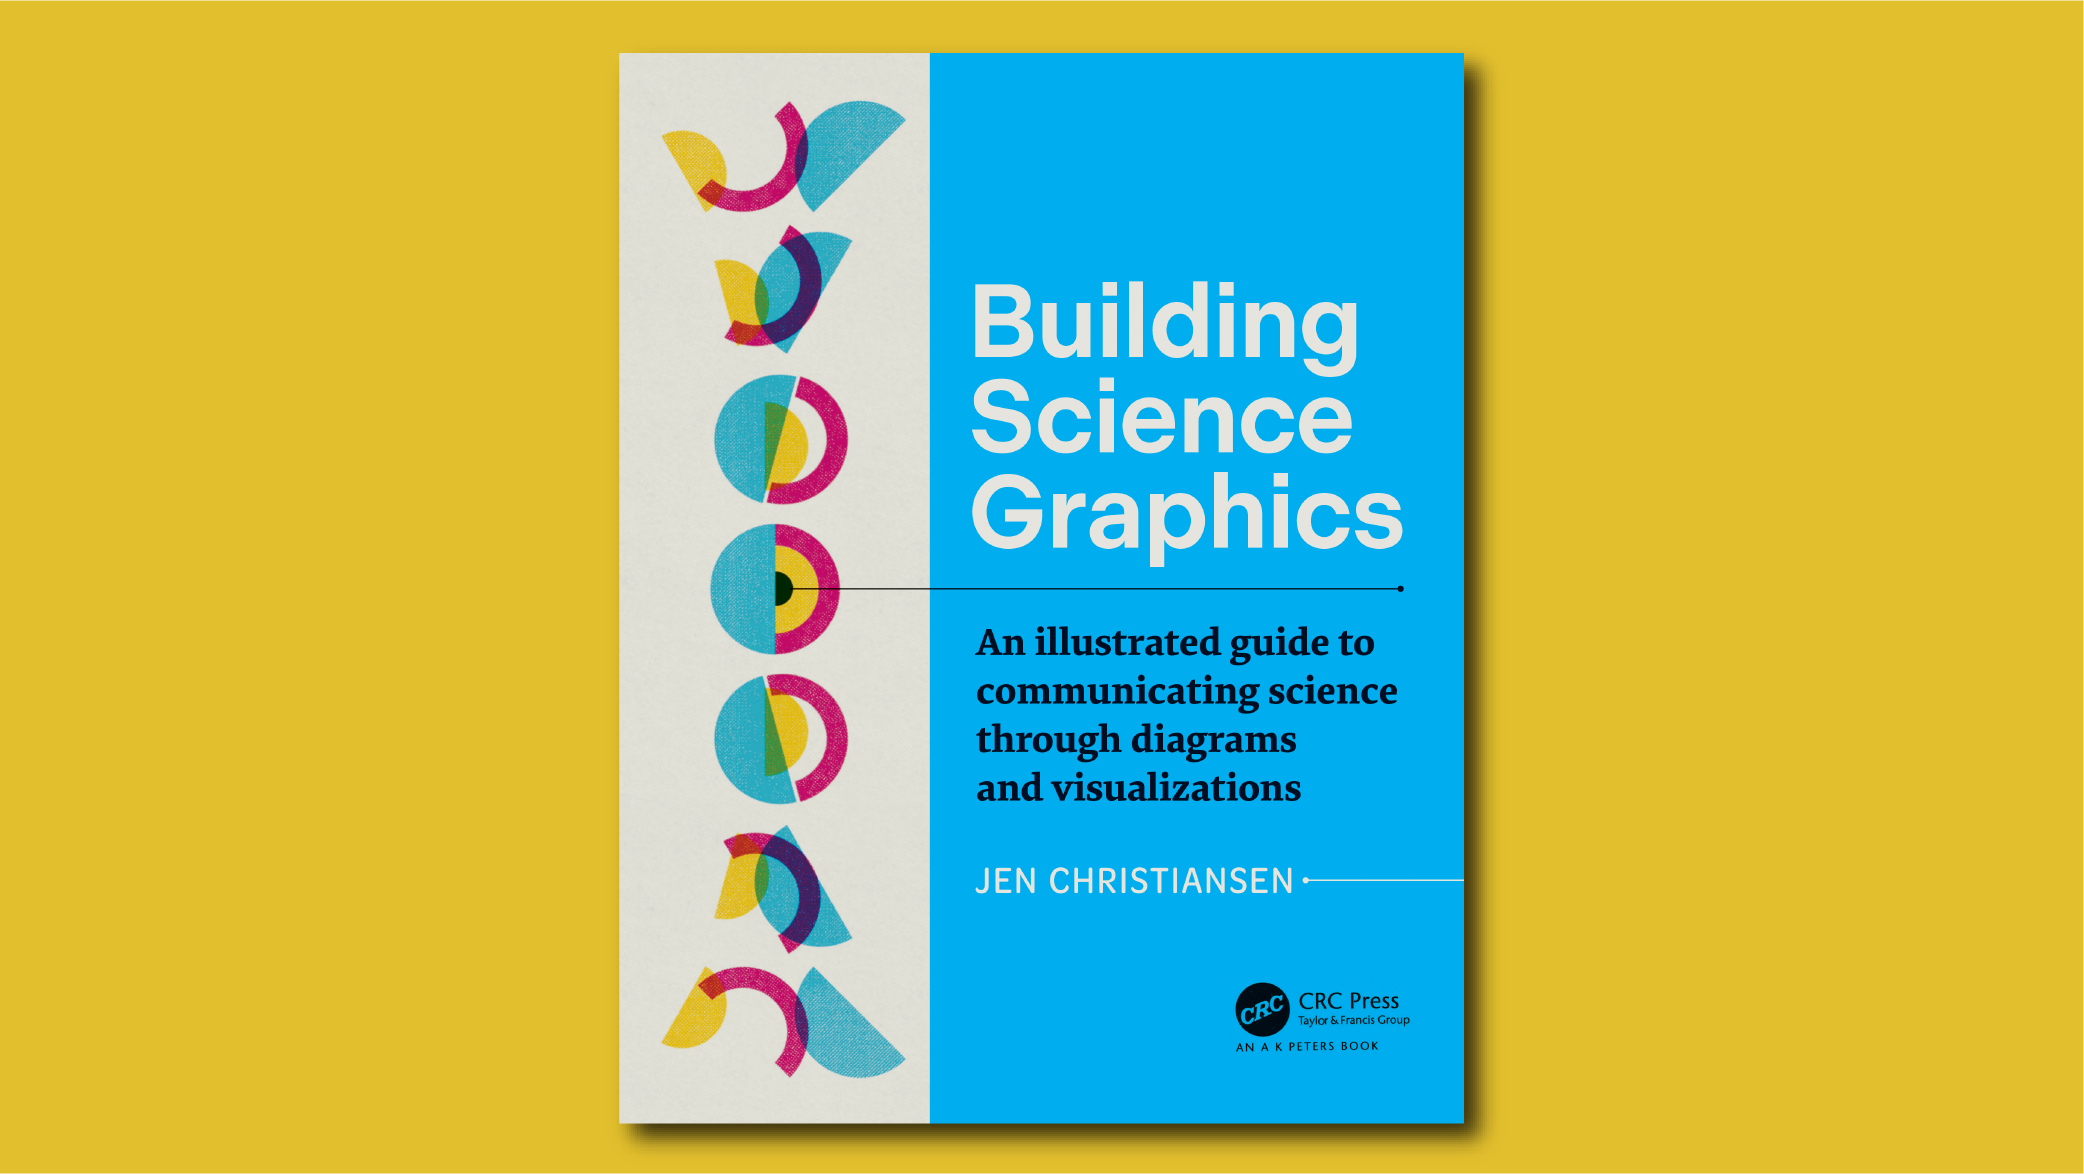 The cover of Building Science Graphics: An Illustrated Guide to Communicating Science through Diagrams and Visualizations, by Jen Christiansen